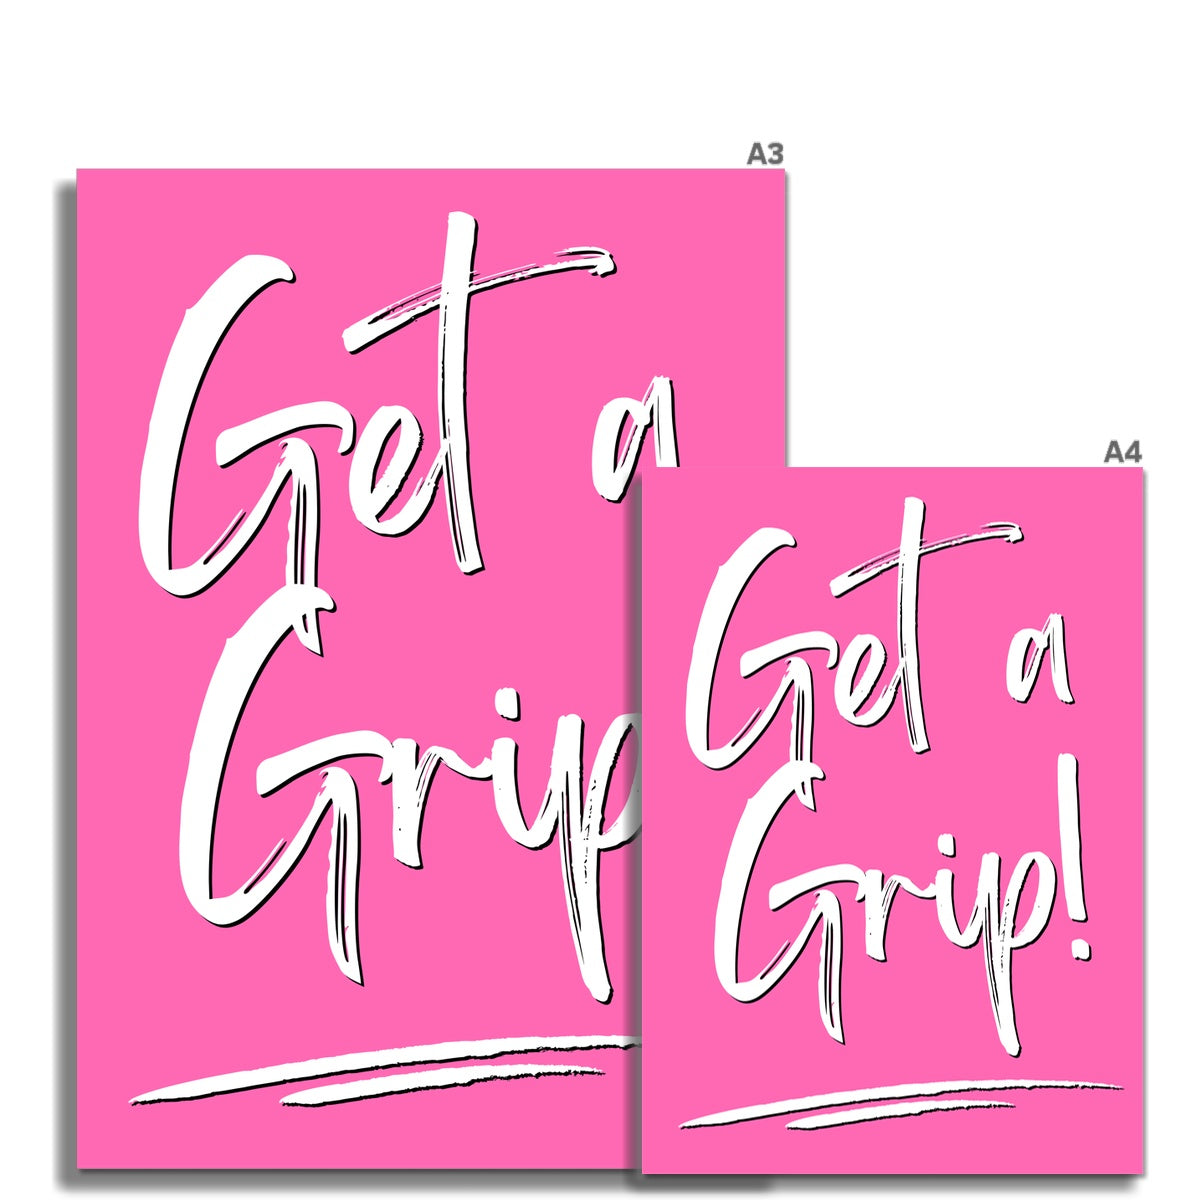 Rolled eco canvas with hot pink background and the words 'Get a Grip' written in a large, white, handwriting-style font. The words are underlined by two white strokes at the bottom of the blank greeting card.